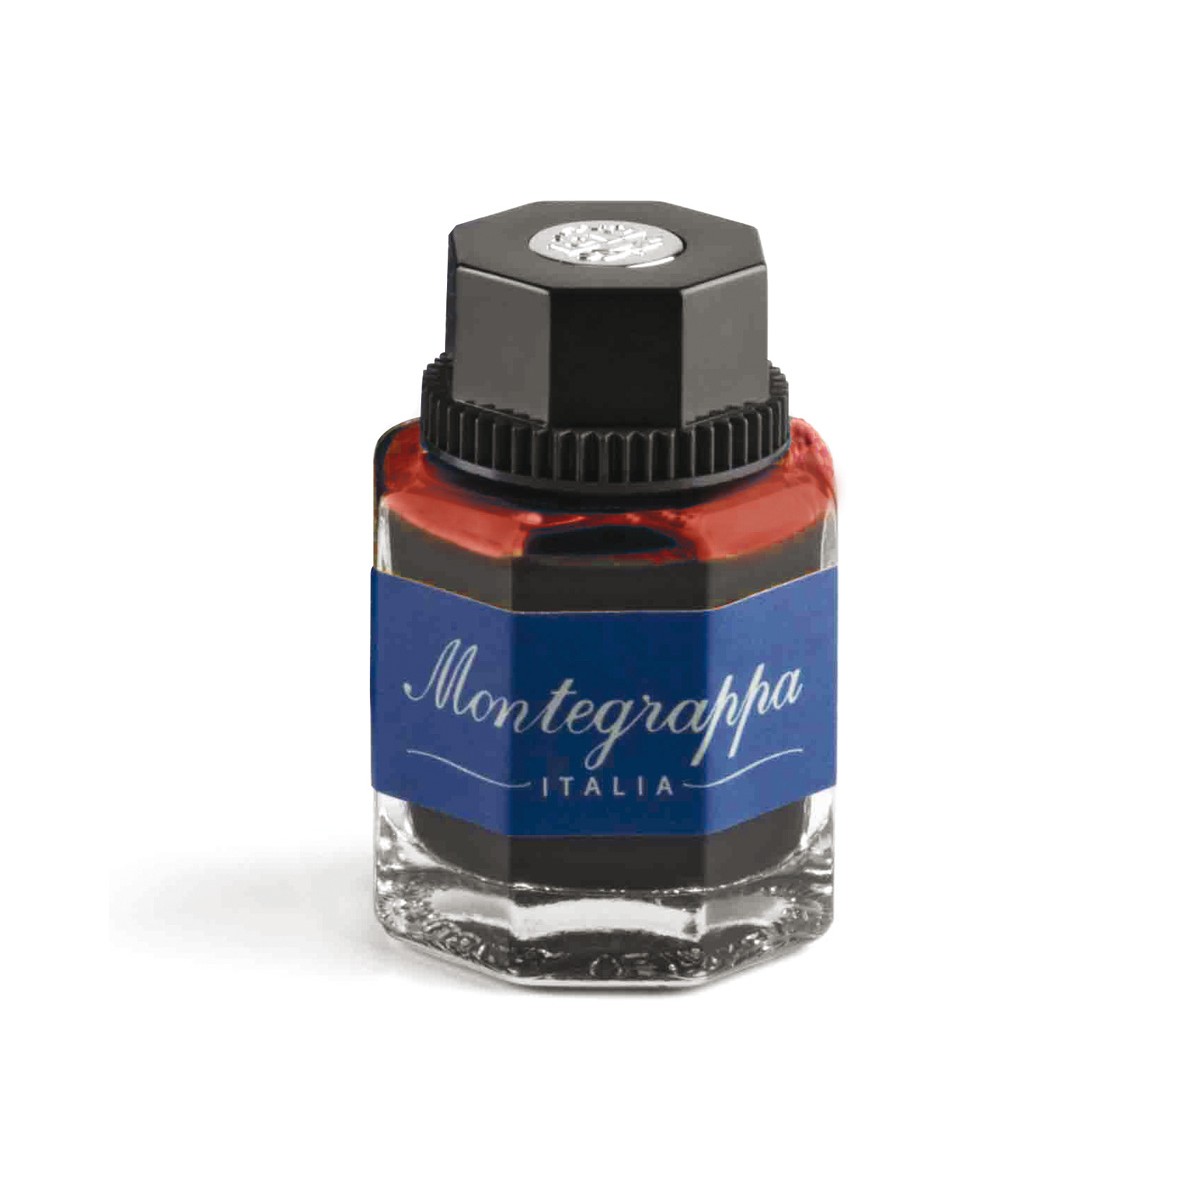 Motegrappa - Ink bottle - Red